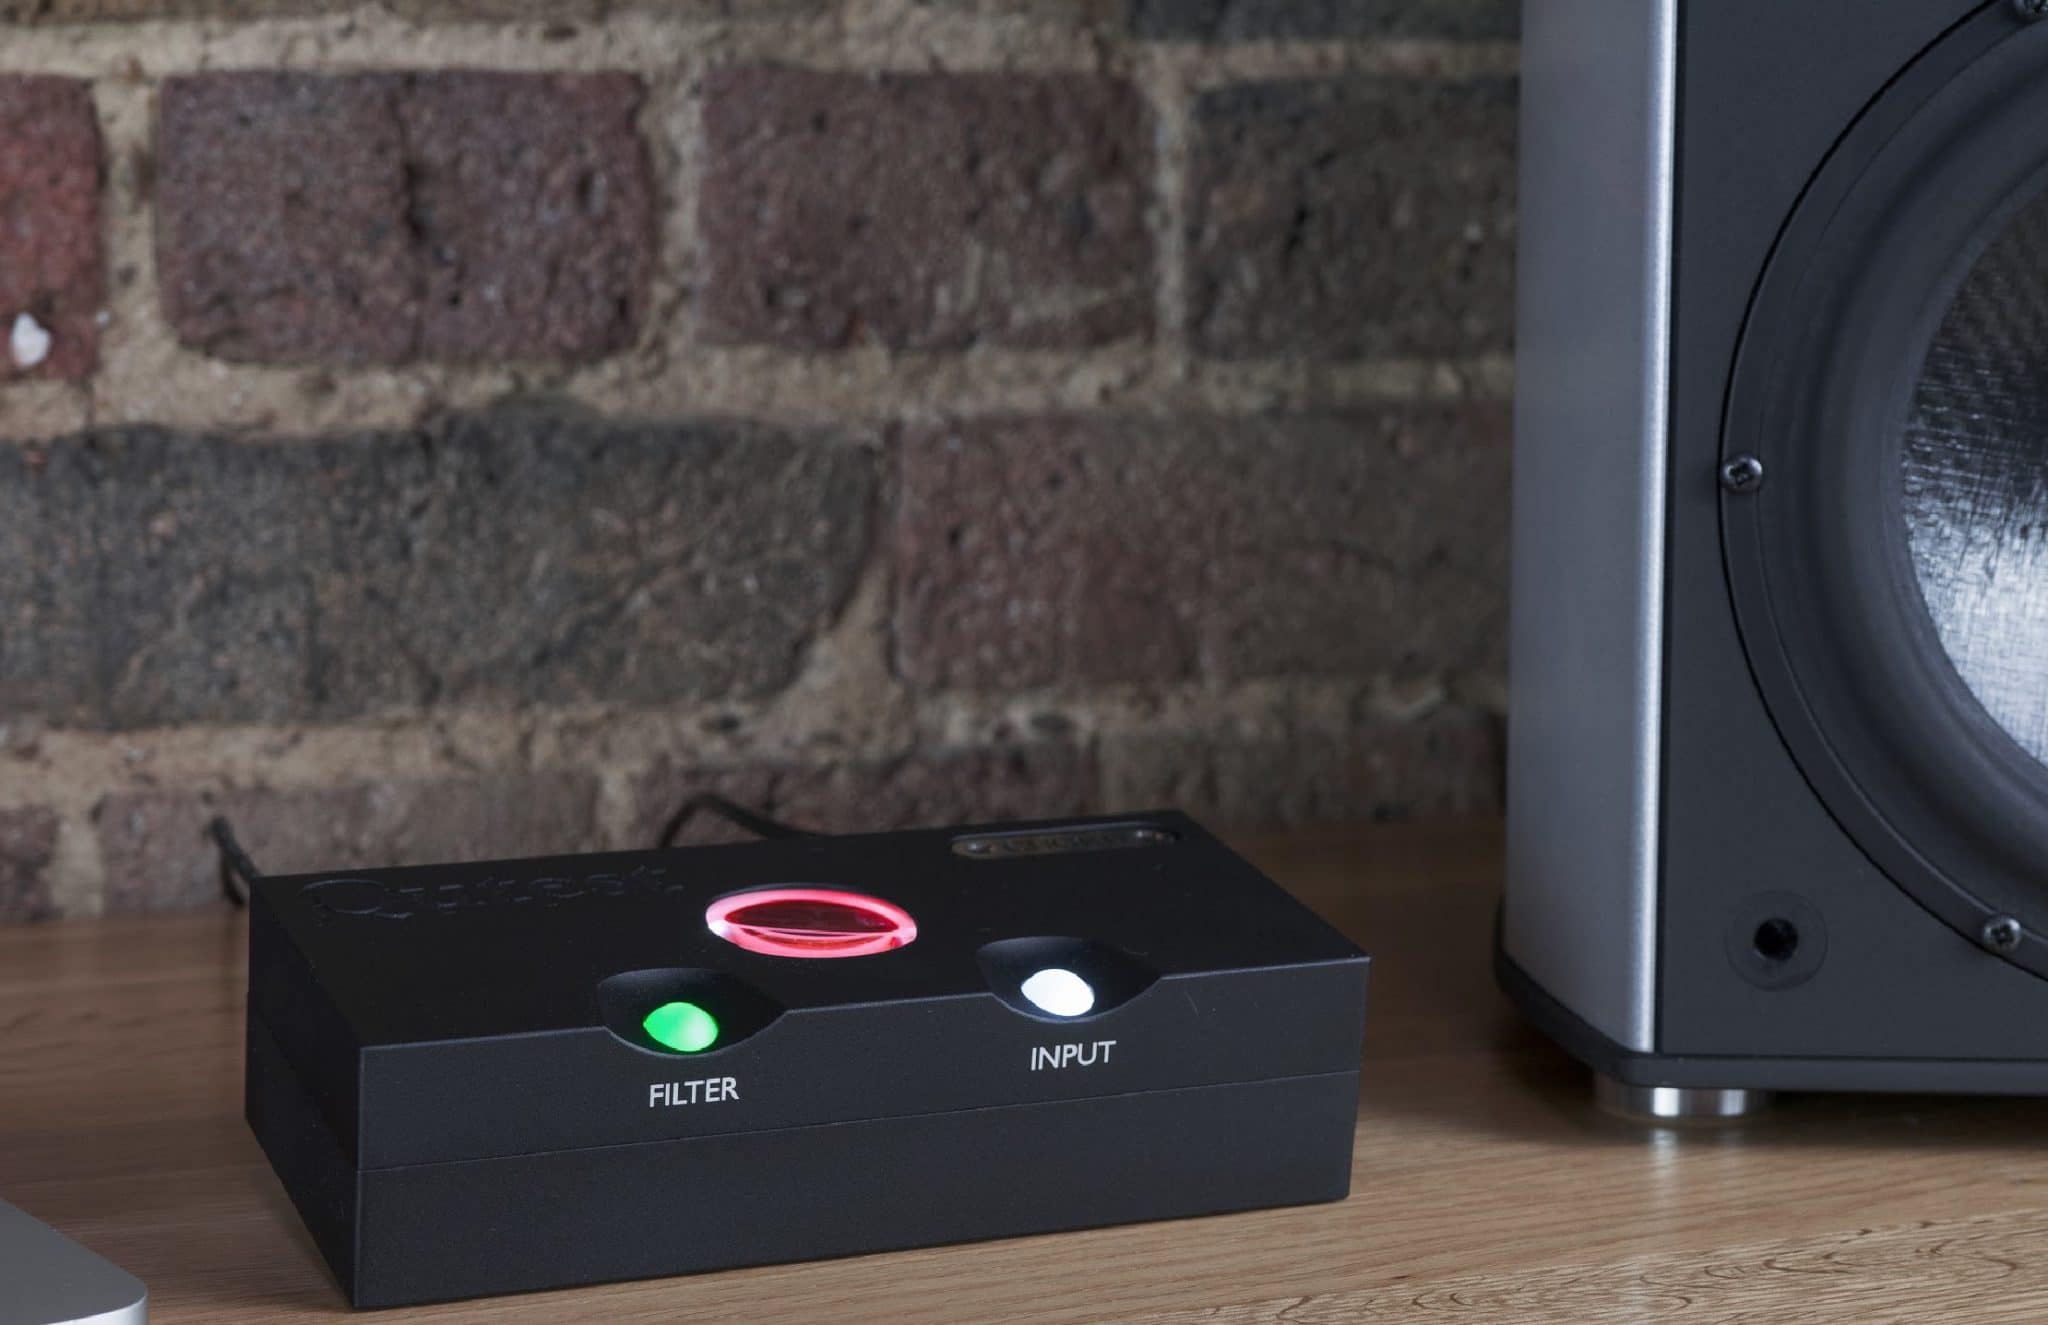 Chord Electronics Qutest DAC: For Home Audio